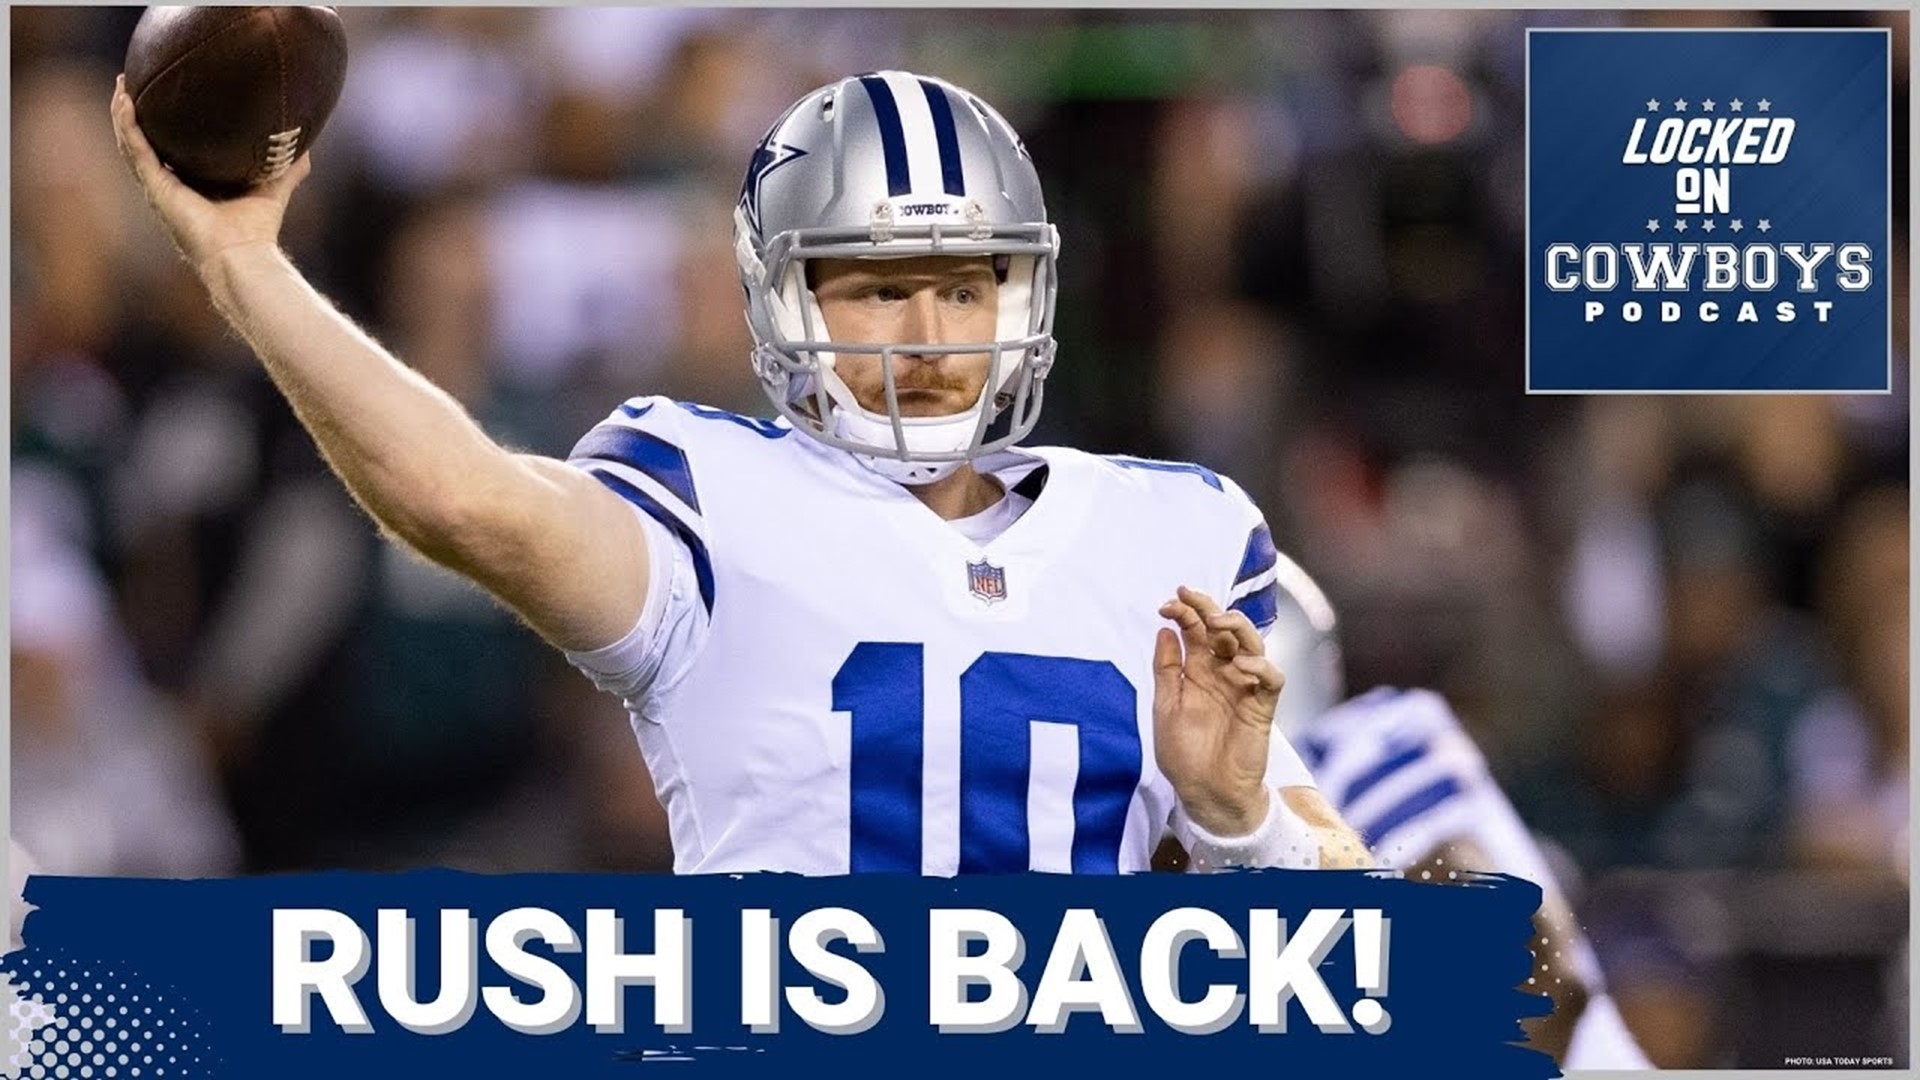 Marcus Mosher and Landon McCool discuss the Dallas Cowboys re-signing veteran quarterback Cooper Rush. Does that mean the Cowboys won't draft a quarterback in 2023?